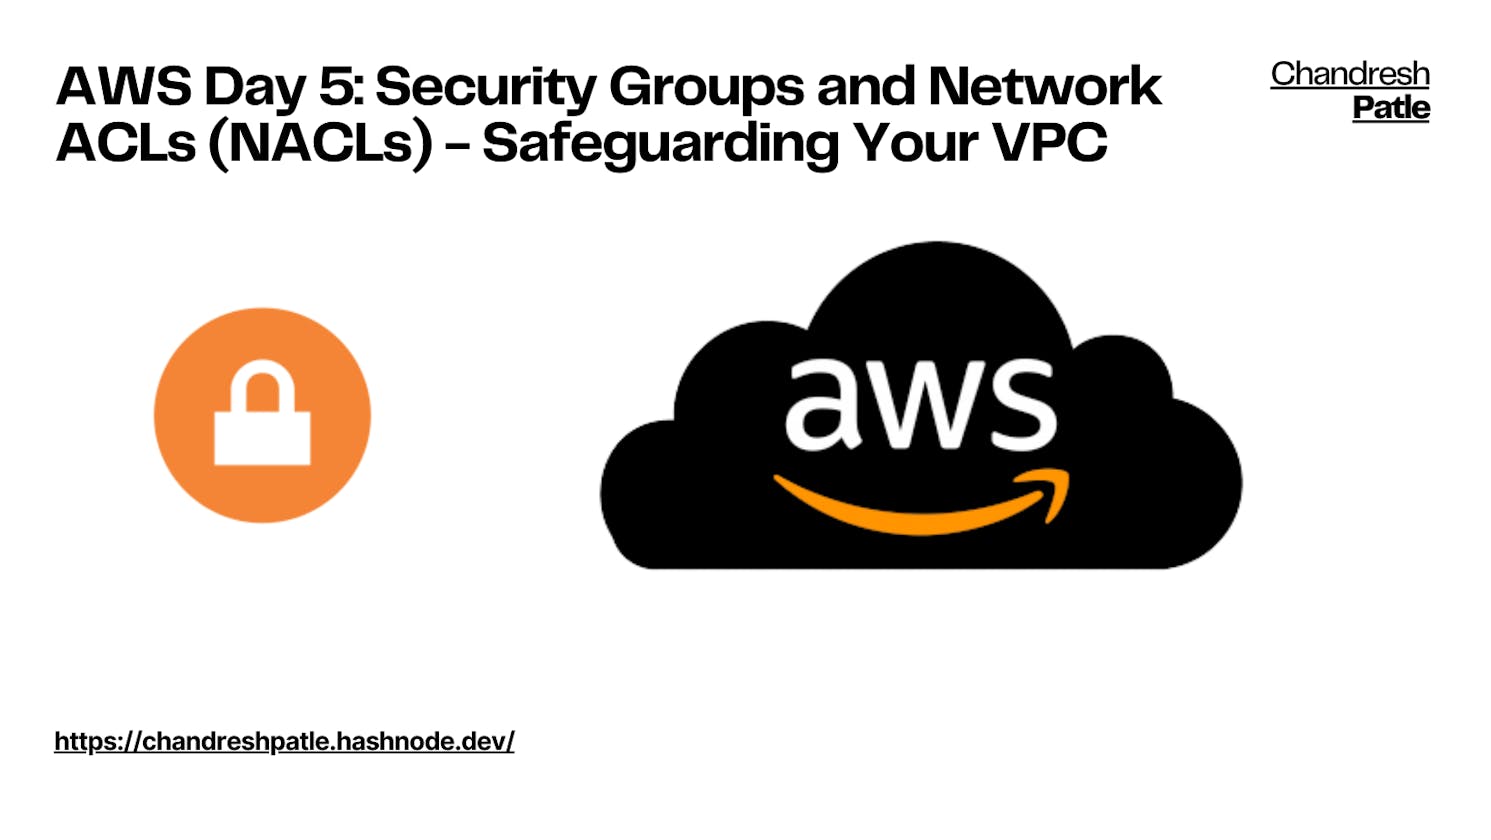 AWS Day 5: Security Groups and Network ACLs (NACLs) - Safeguarding Your VPC